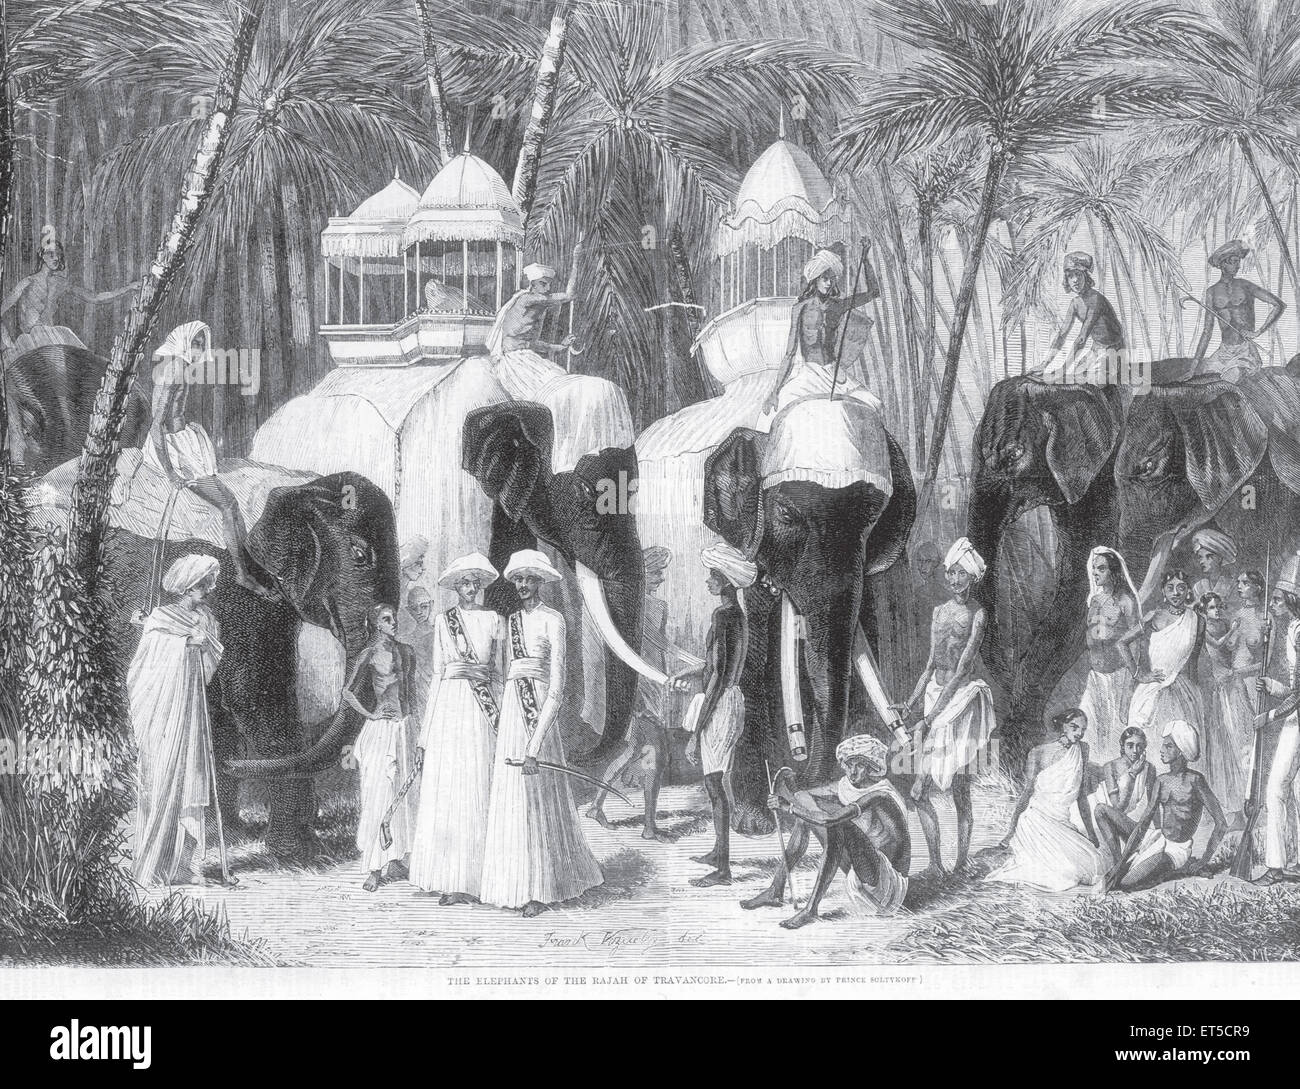 General View The Elephants of the Rajah of Travancore ; India Stock Photo